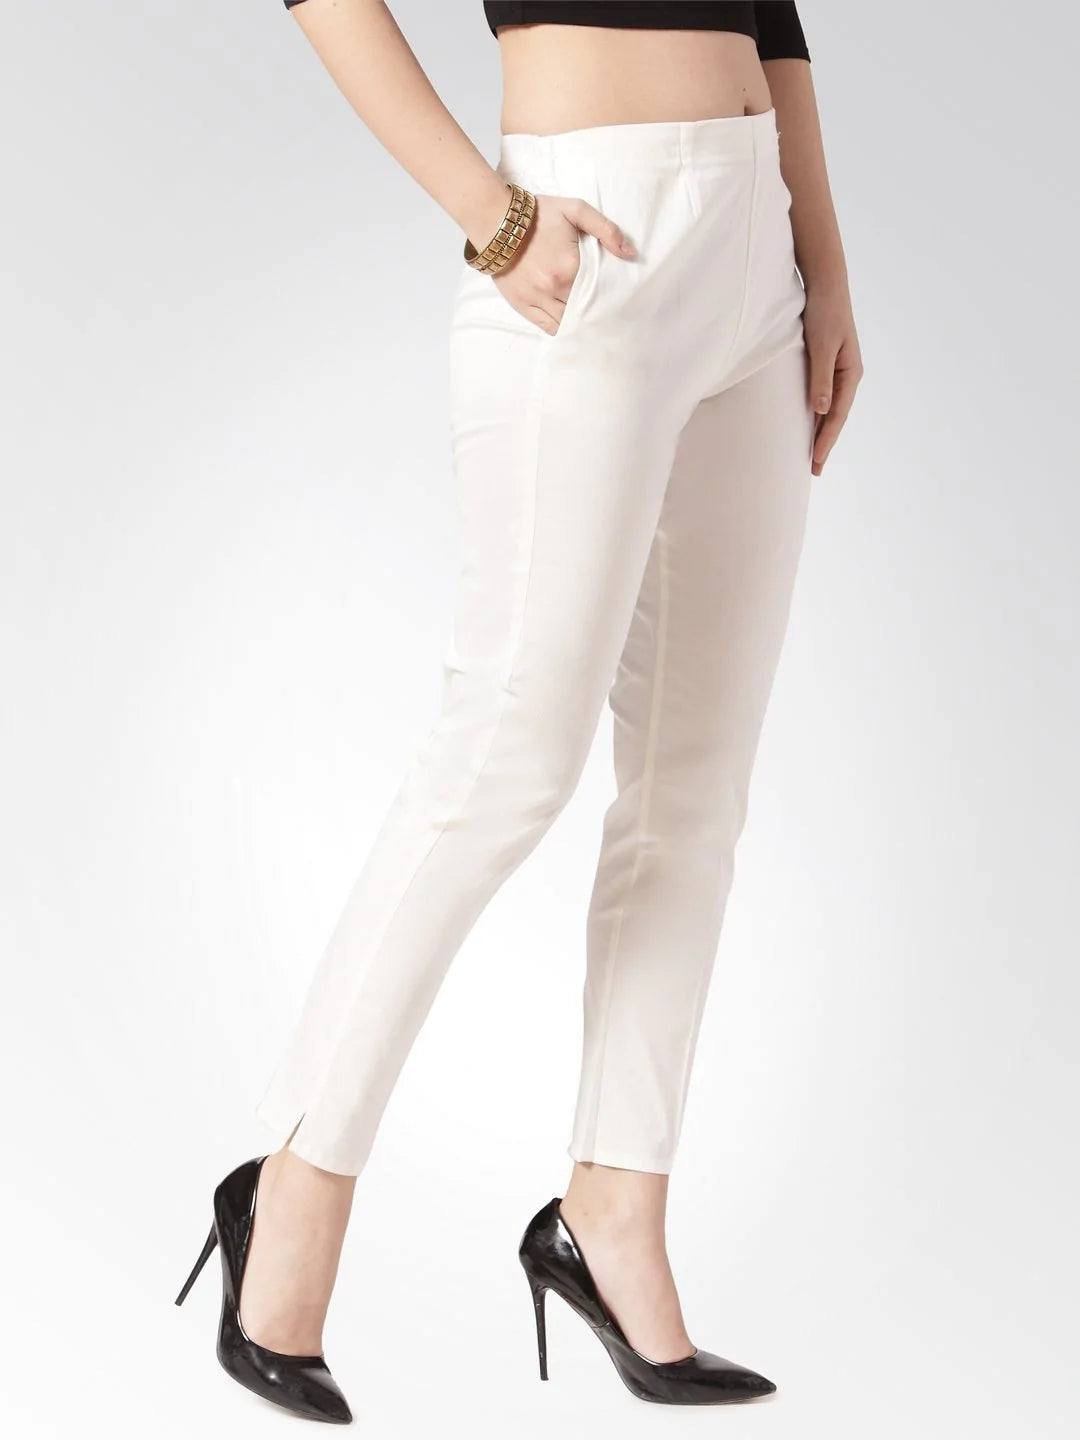 Jompers Women Off-White Smart Slim Fit Solid Regular Trousers ( JOP 2119 Off-White )